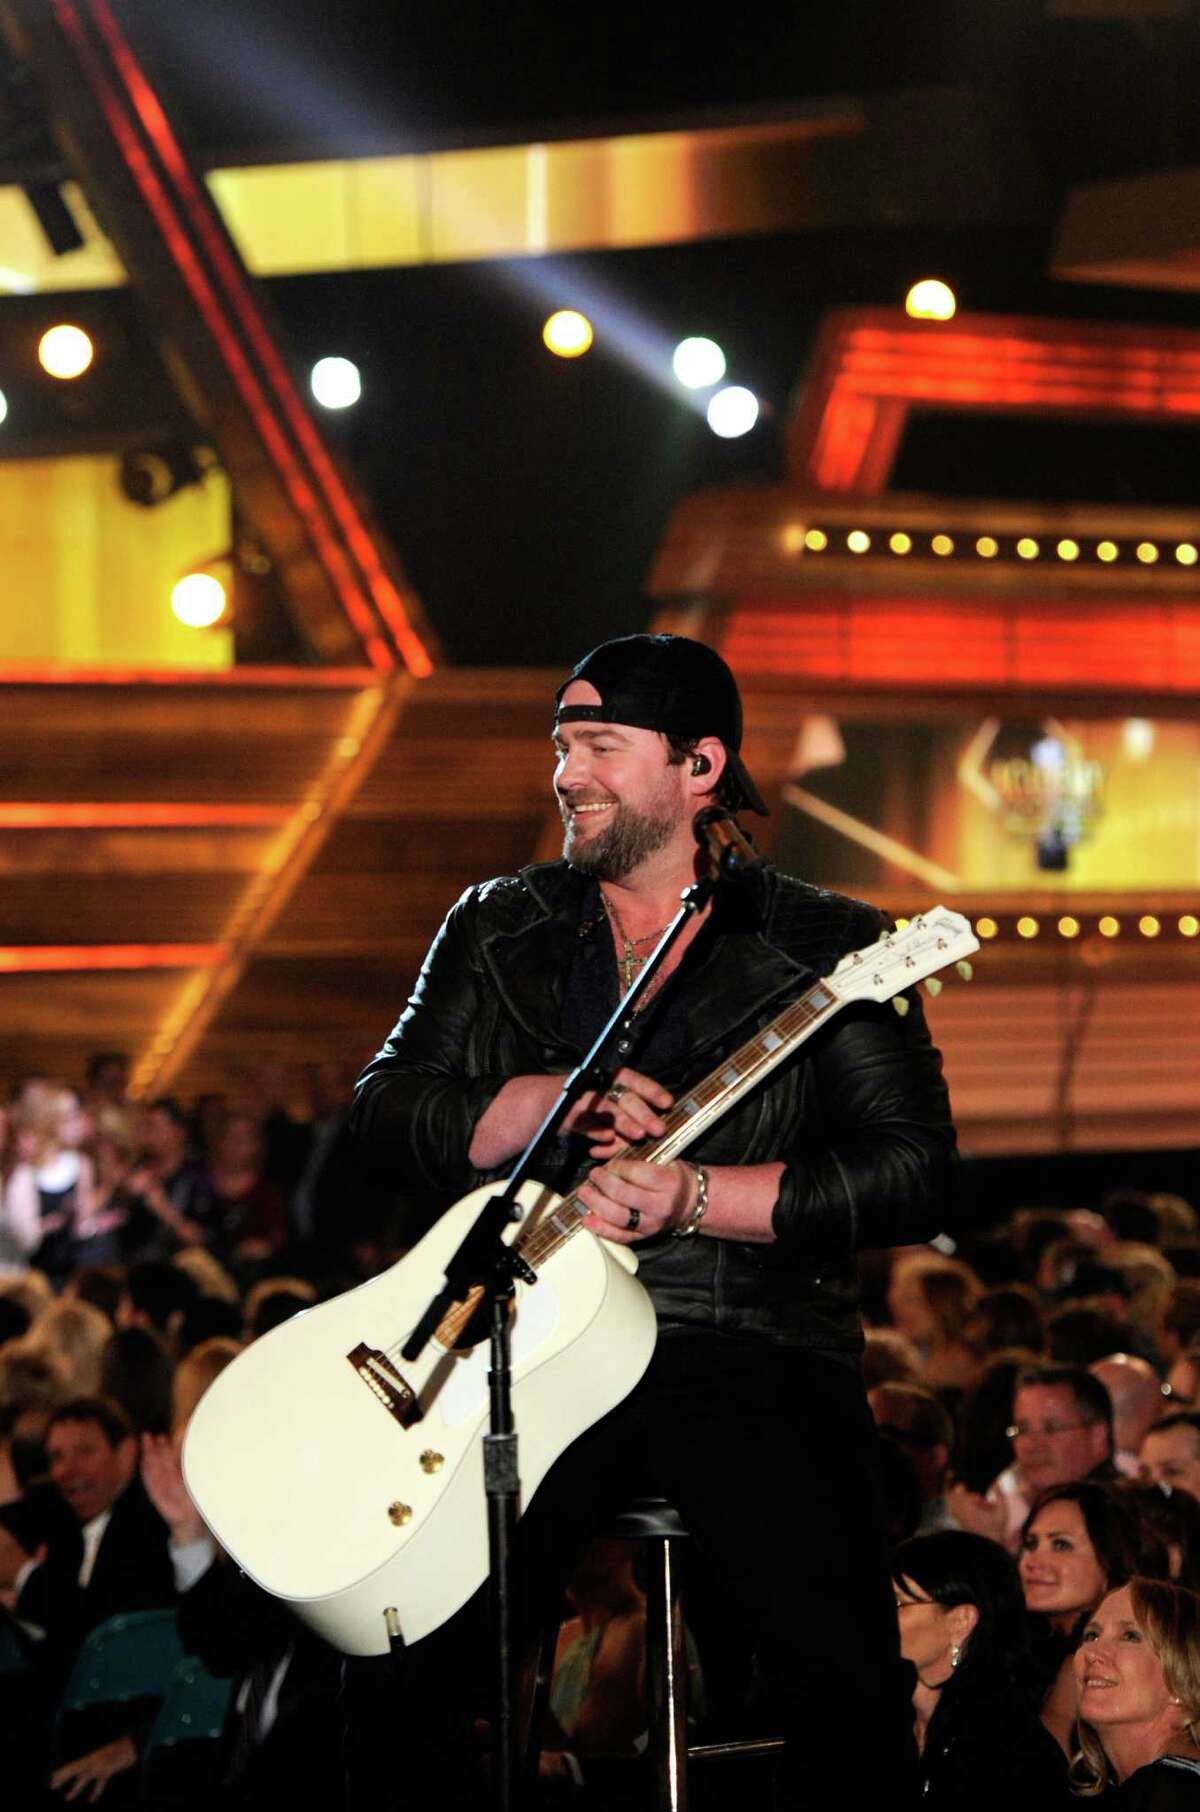 LAS VEGAS, NV - APRIL 06: Singer Lee Brice performs onstage during the 49th Annual Academy Of Country Music Awards at the MGM Grand Garden Arena on April 6, 2014 in Las Vegas, Nevada.